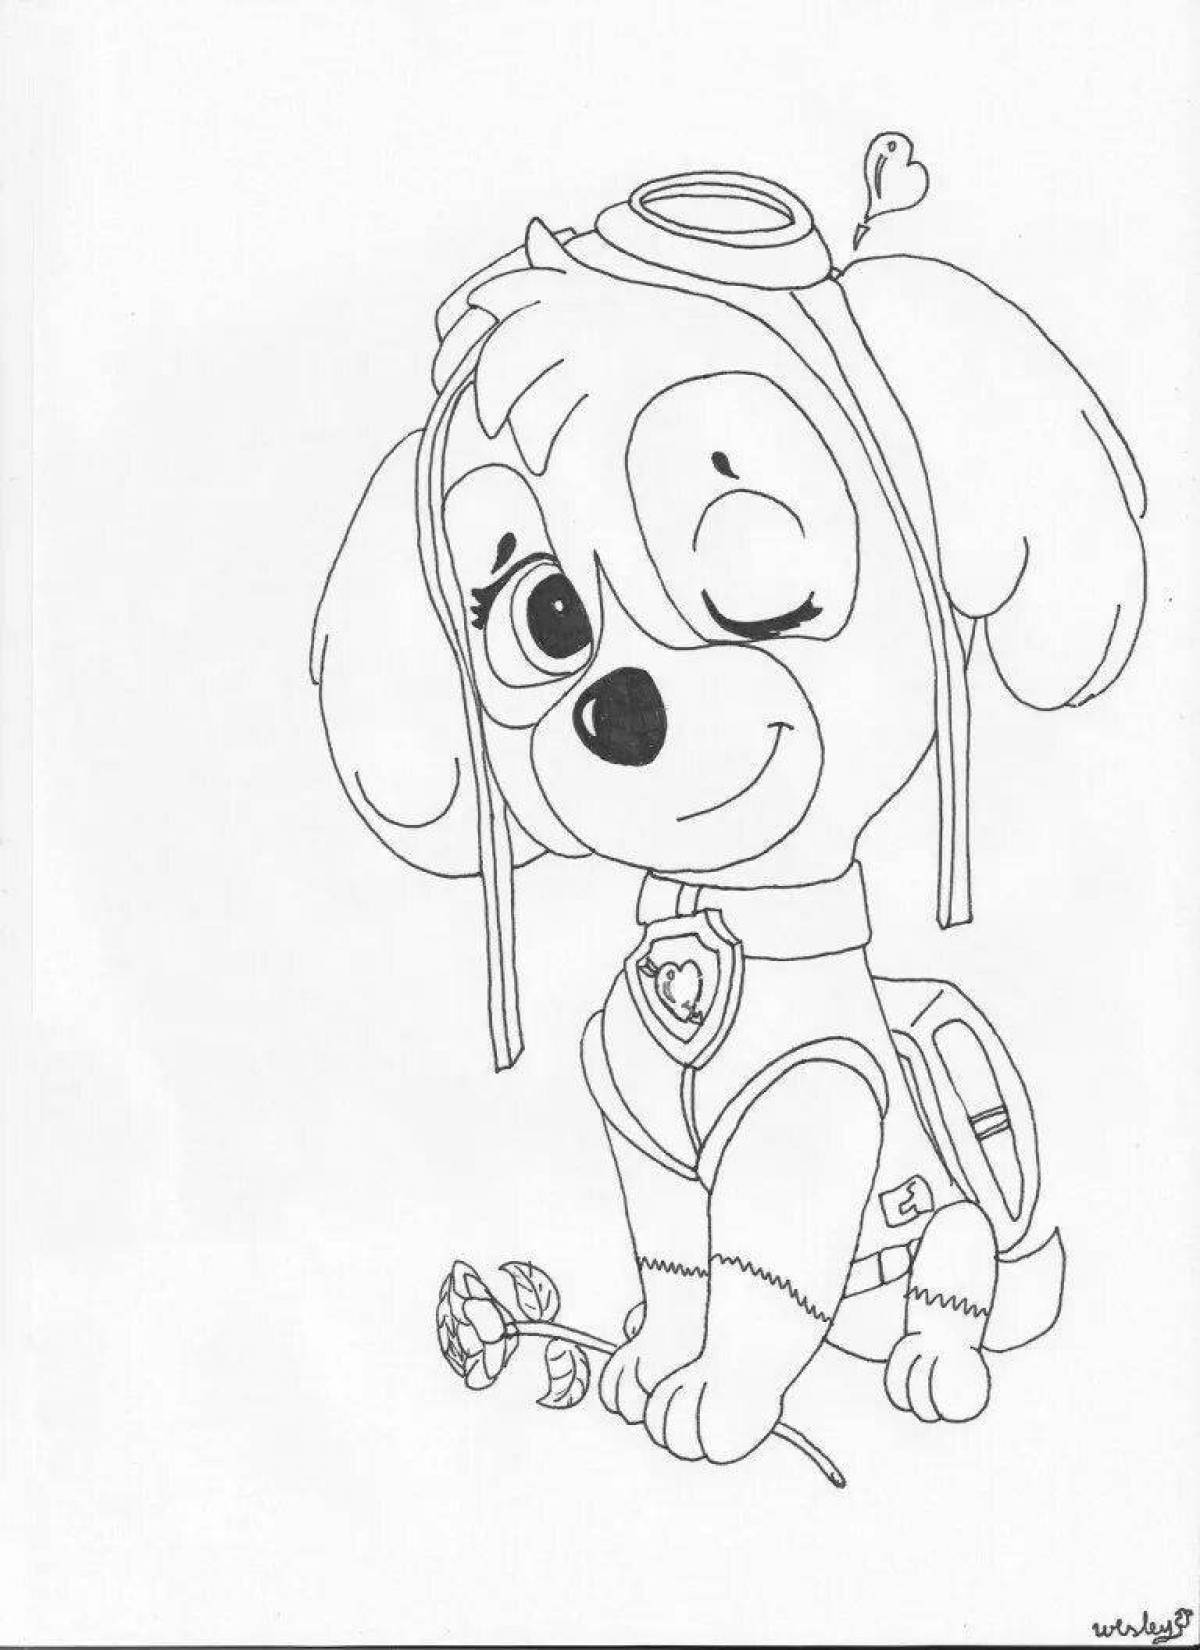 Naughty skye puppy coloring book